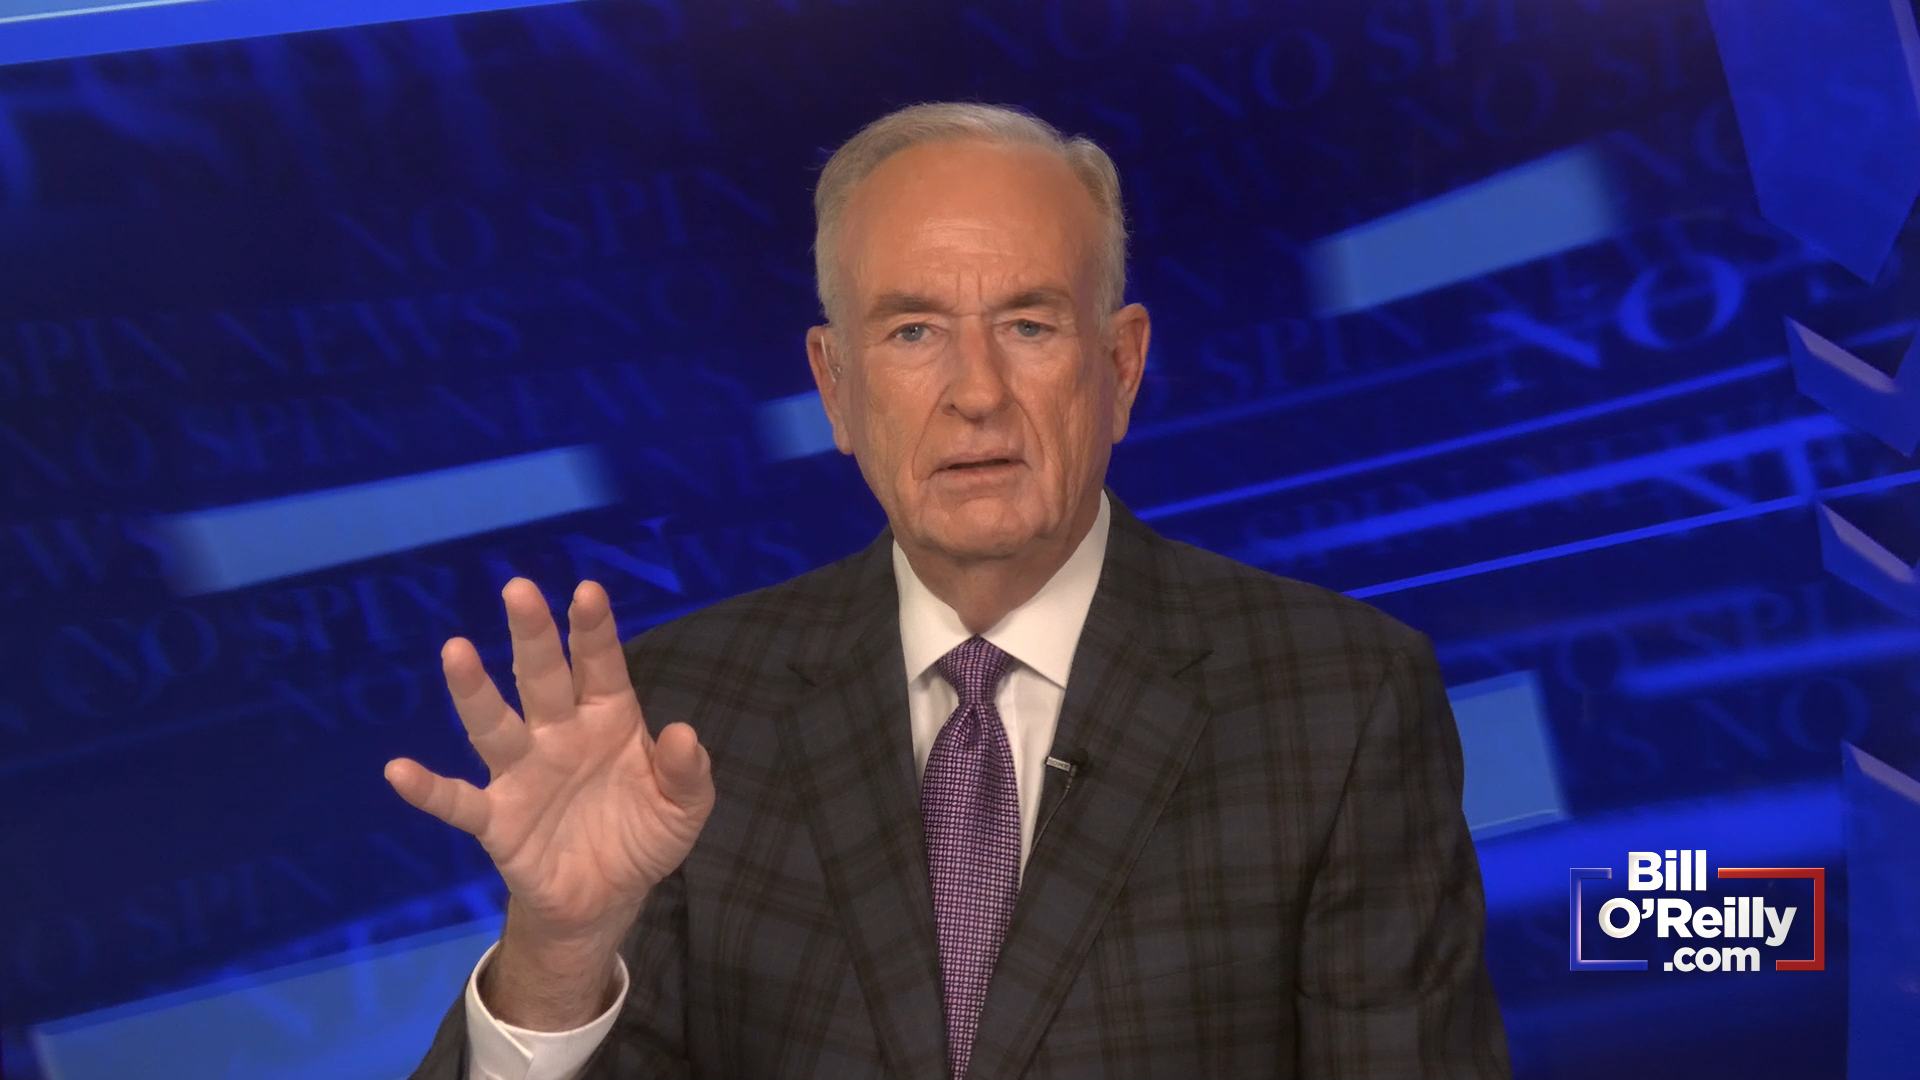 O'Reilly: 'Joe Biden is Embarrassing the United States'